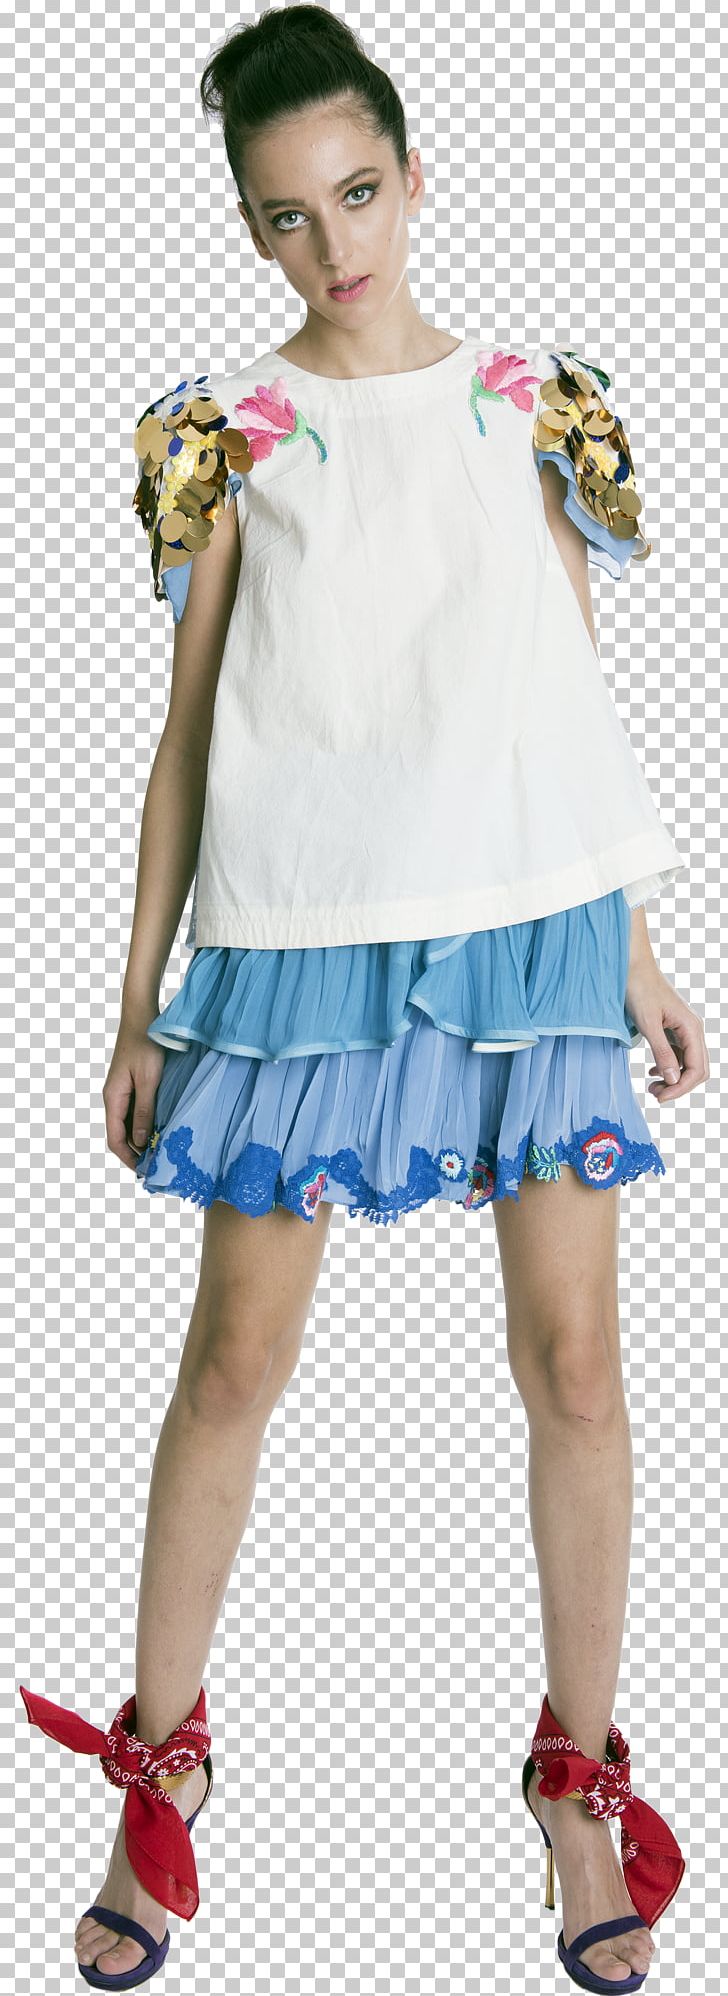 Corina Vladescu T-shirt Skirt Pants Shorts PNG, Clipart, Blue, Clothing, Costume, Designer, Electric Blue Free PNG Download